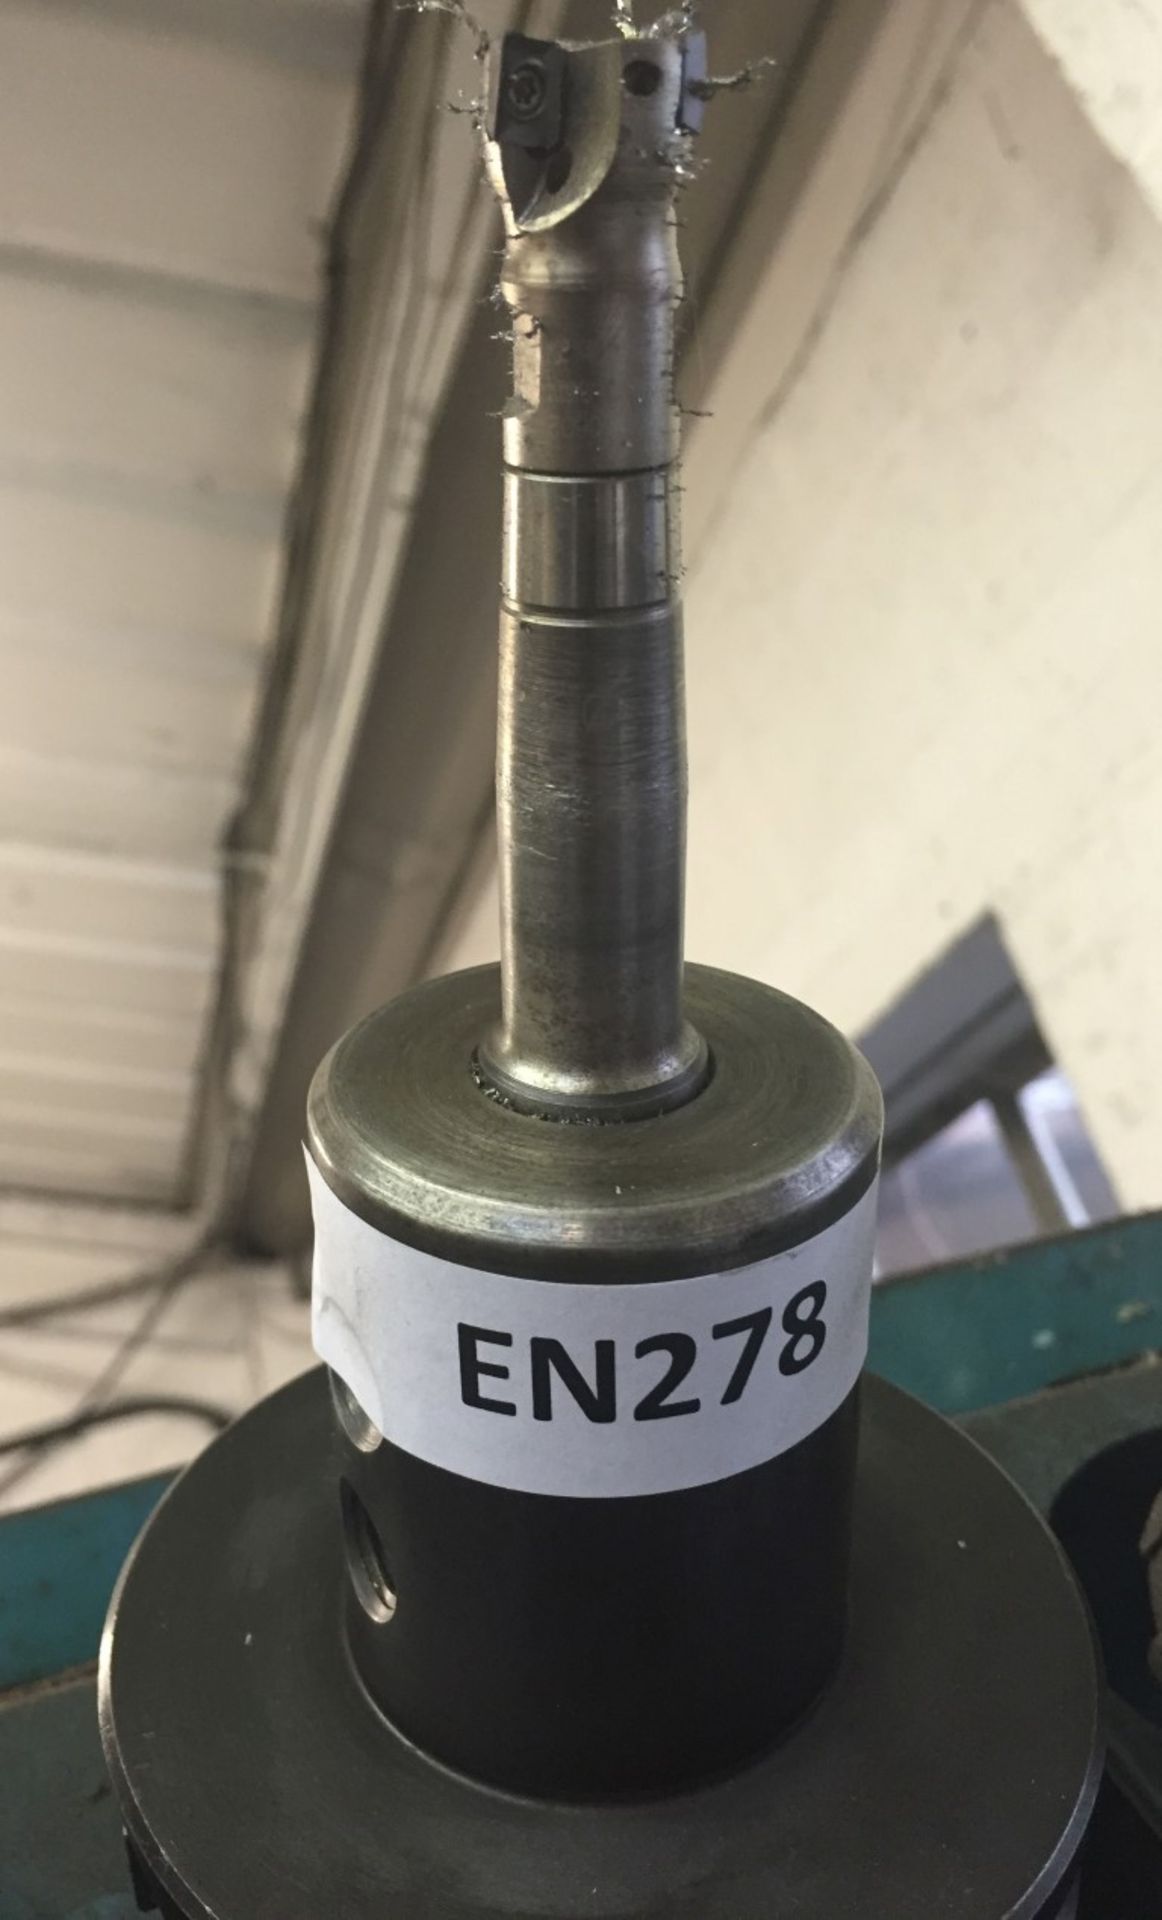 1 x CNC / VMC Mill Chuck and milling cutter - CL202 - Ref EN278 - Location: Altrincham WA14 - Image 3 of 3